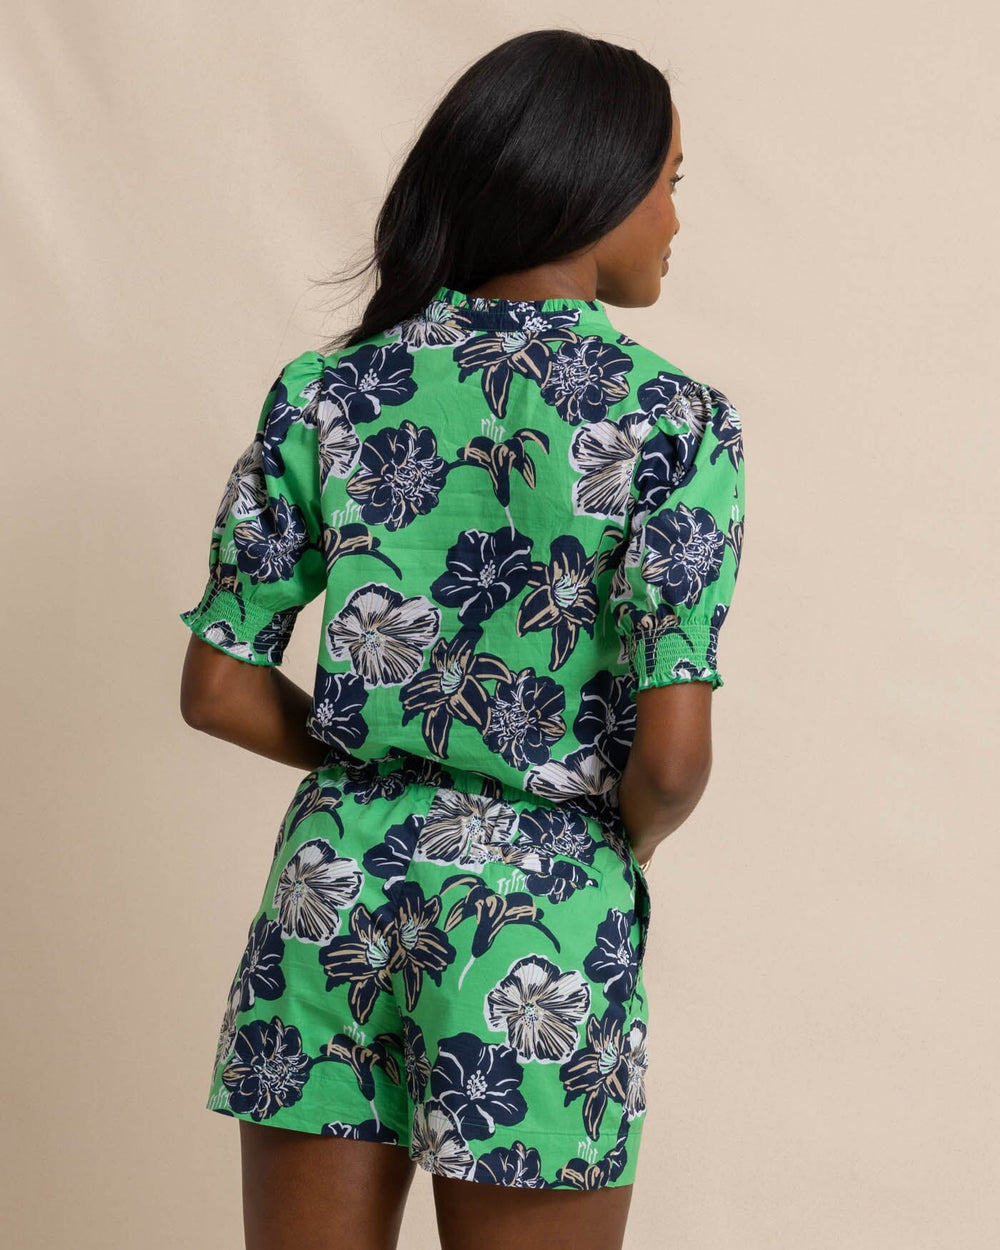 The back view of the Southern Tide Meadow Beach Blooms Lawn Blouse by Southern Tide - Lawn Green